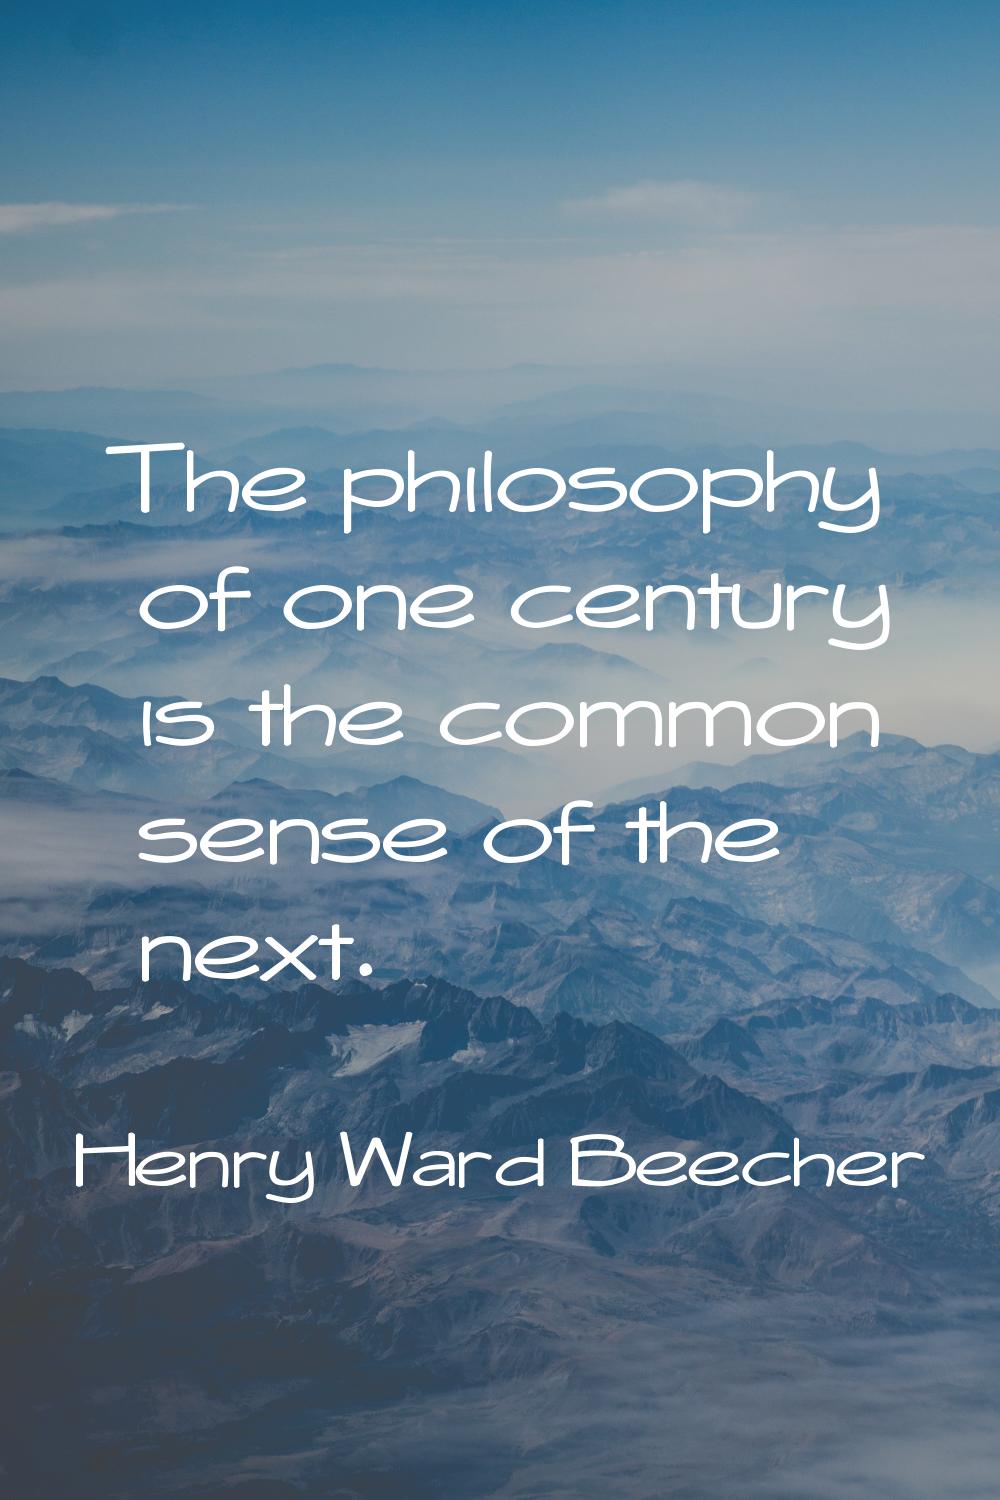 The philosophy of one century is the common sense of the next.